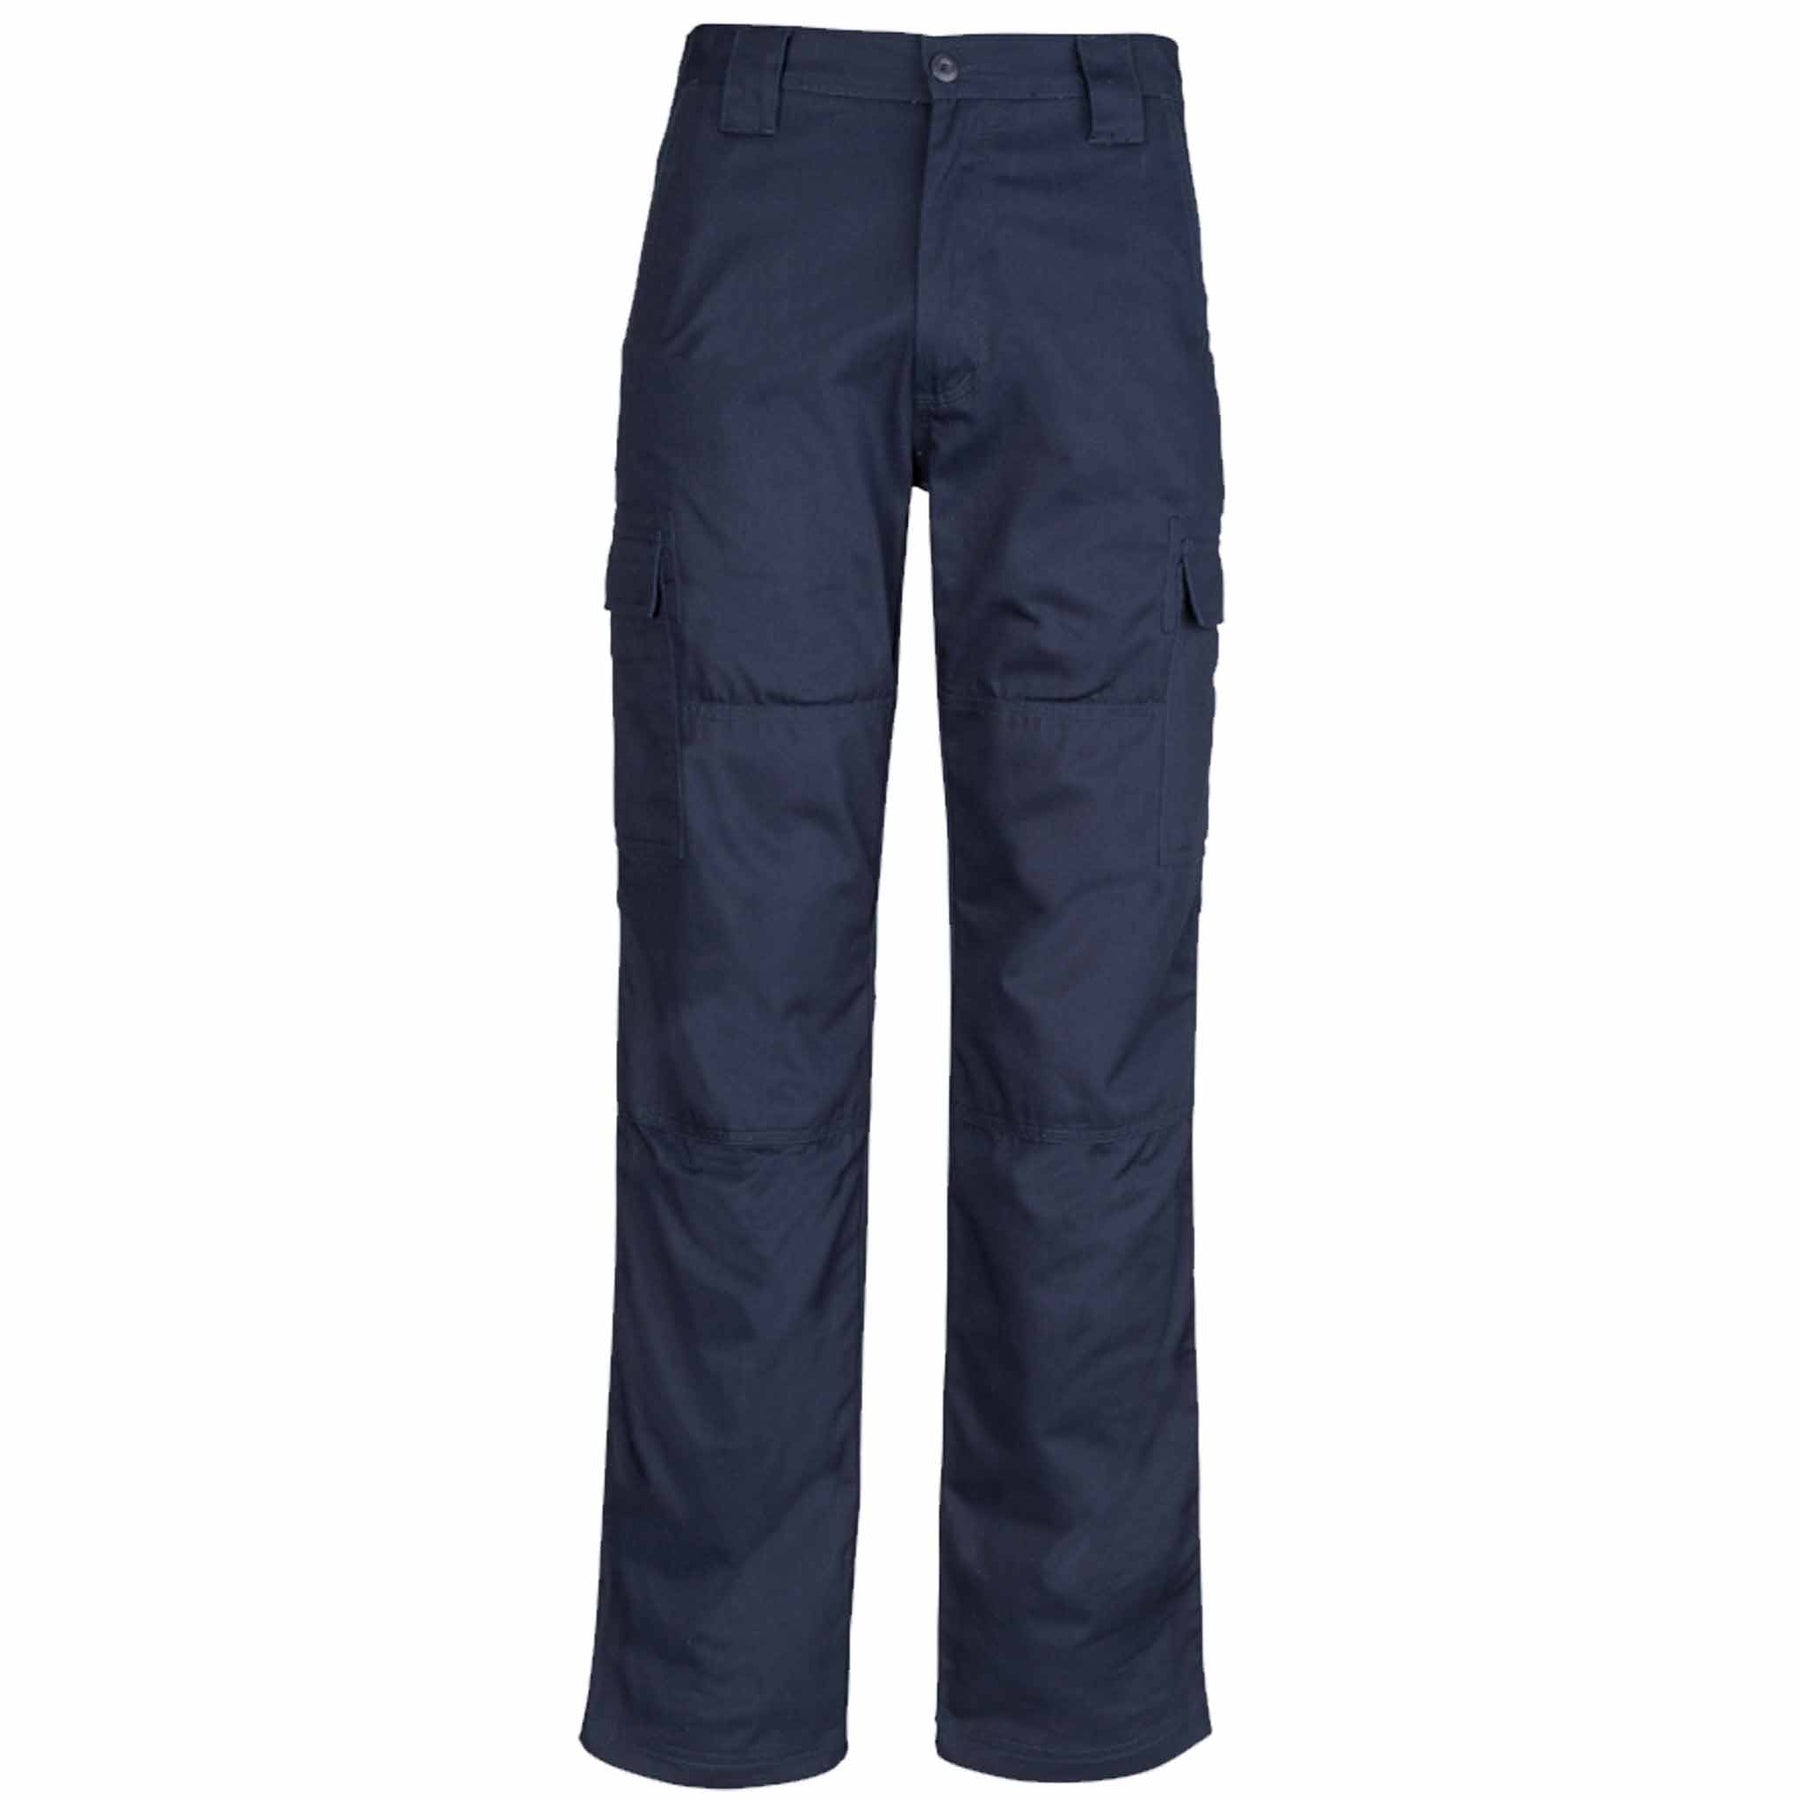 MENS DRILL CARGO PANT - ZW001